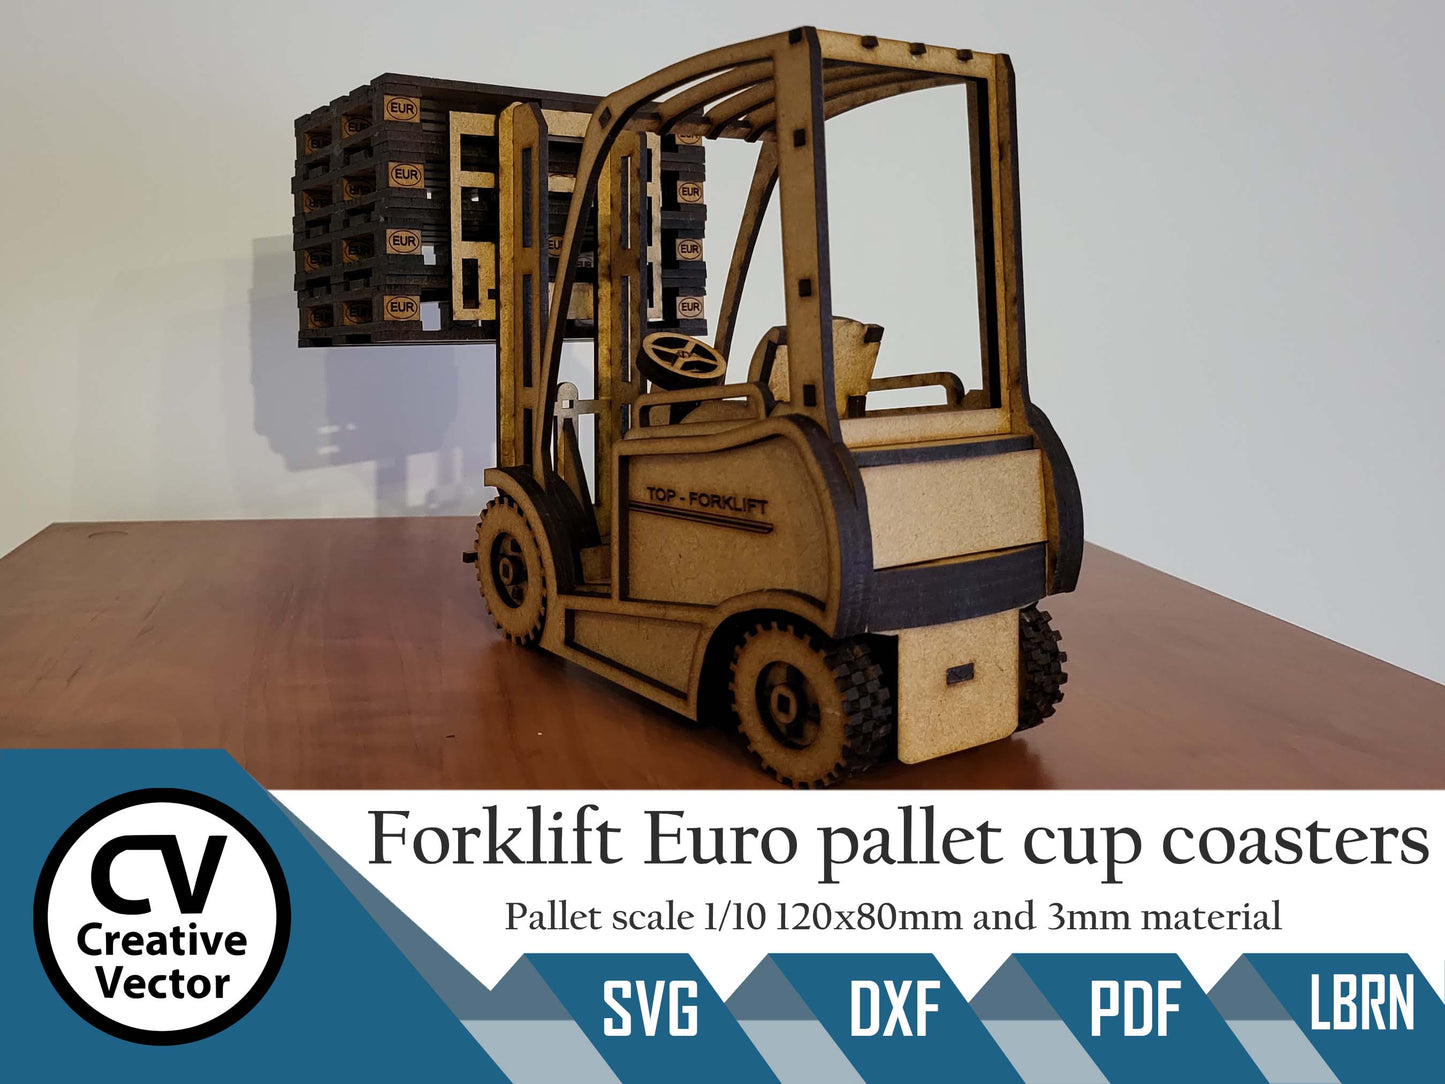 Forklift and Euro pallet Cup coasters for laser cutting